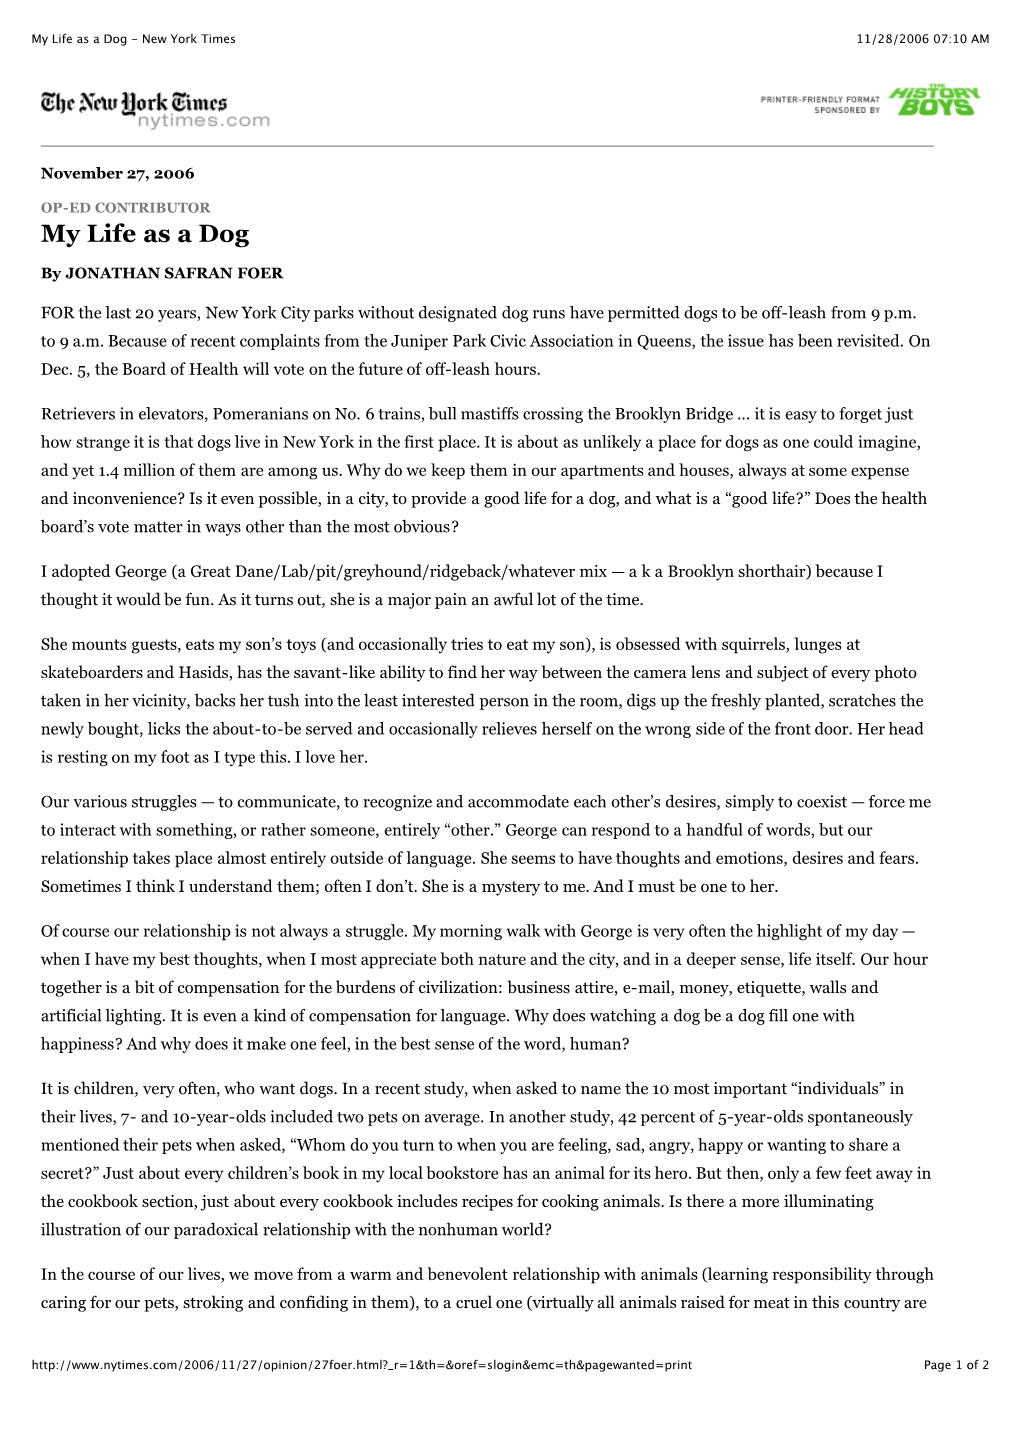 My Life As a Dog - New York Times 11/28/2006 07:10 AM